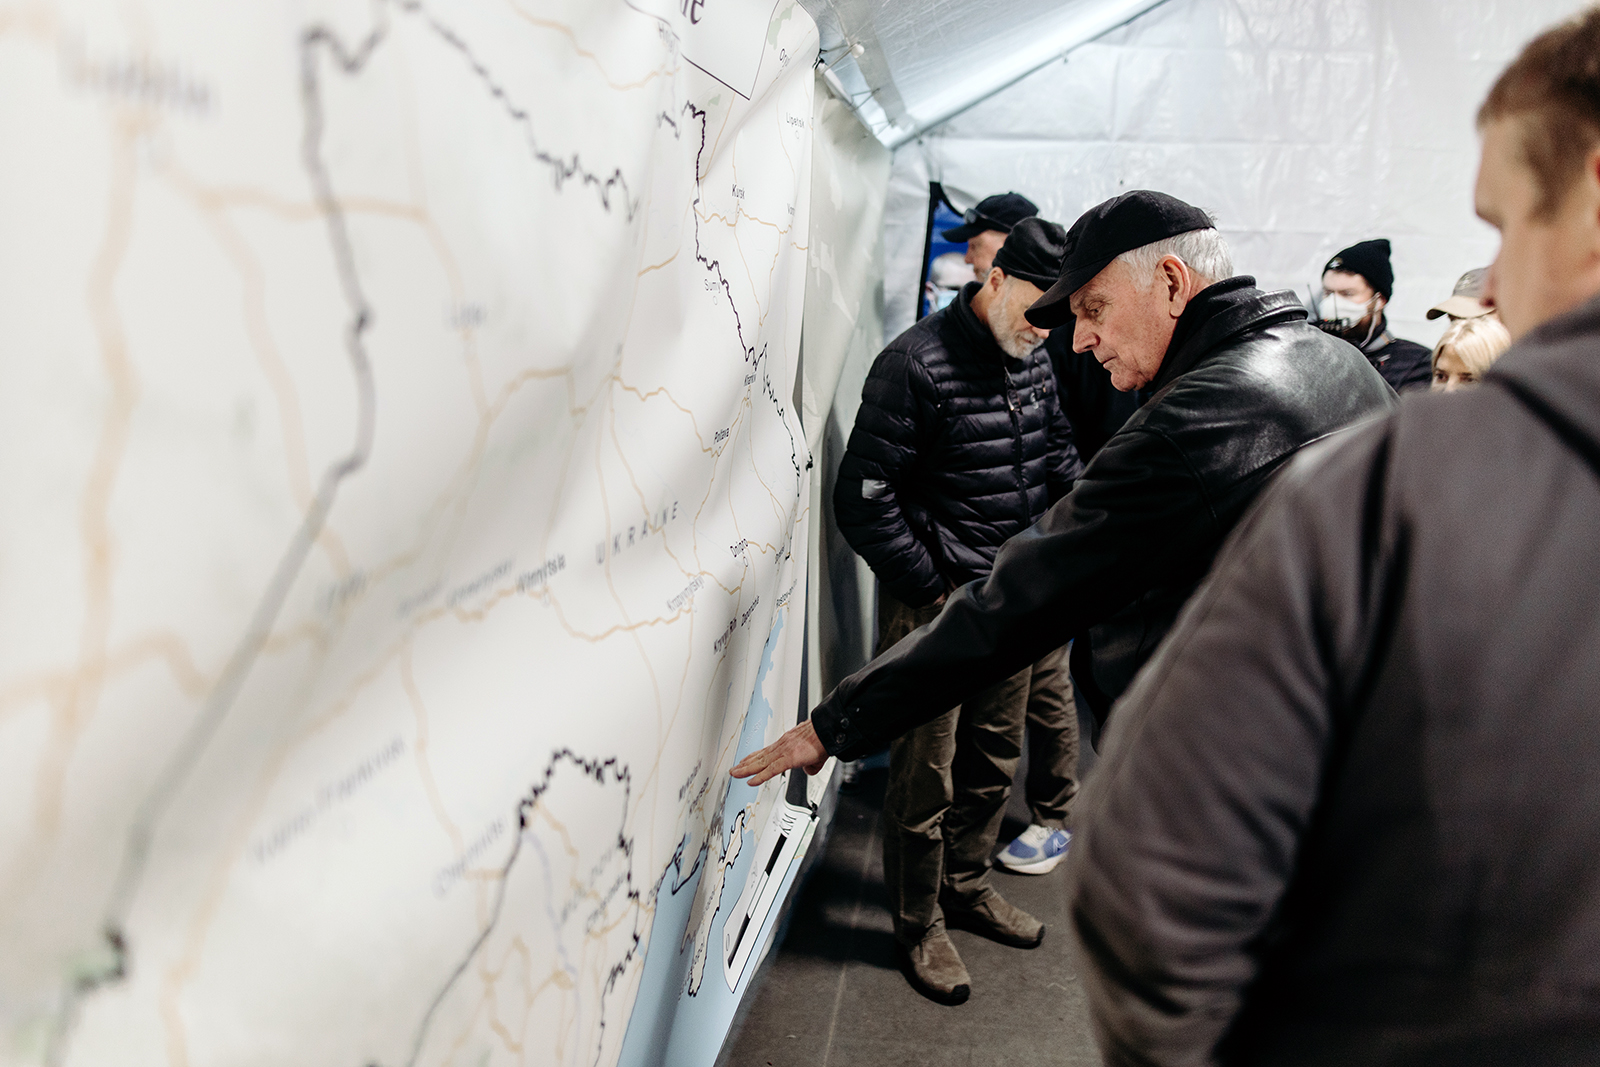 Franklin Graham looks at a map of Ukraine during a recent 2-day visit to Samaritan's Purse operations in Lviv, Ukraine. Photo courtesy of Samaritan's Purse